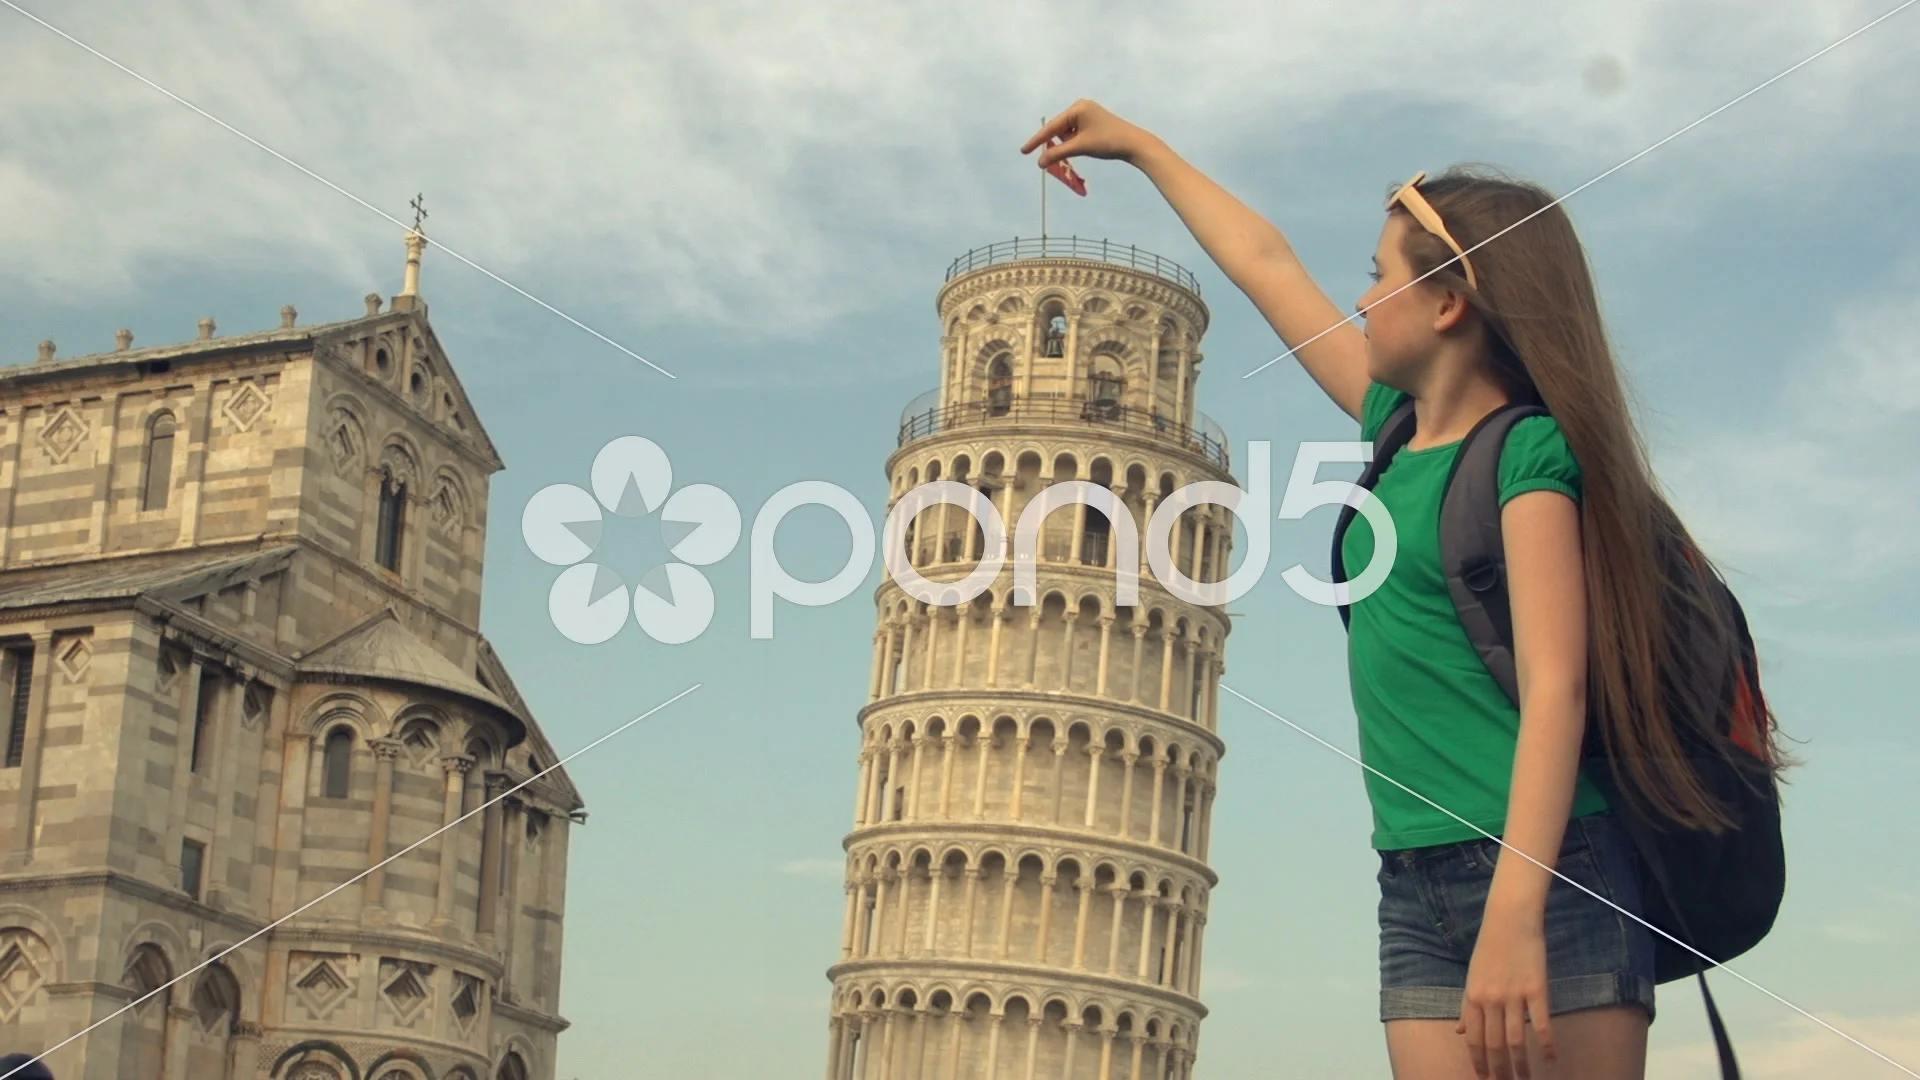 October 2018 Pisa Italy Crowds Tourists Making Funny Poses Front – Stock  Editorial Photo © frantic00 #234519358